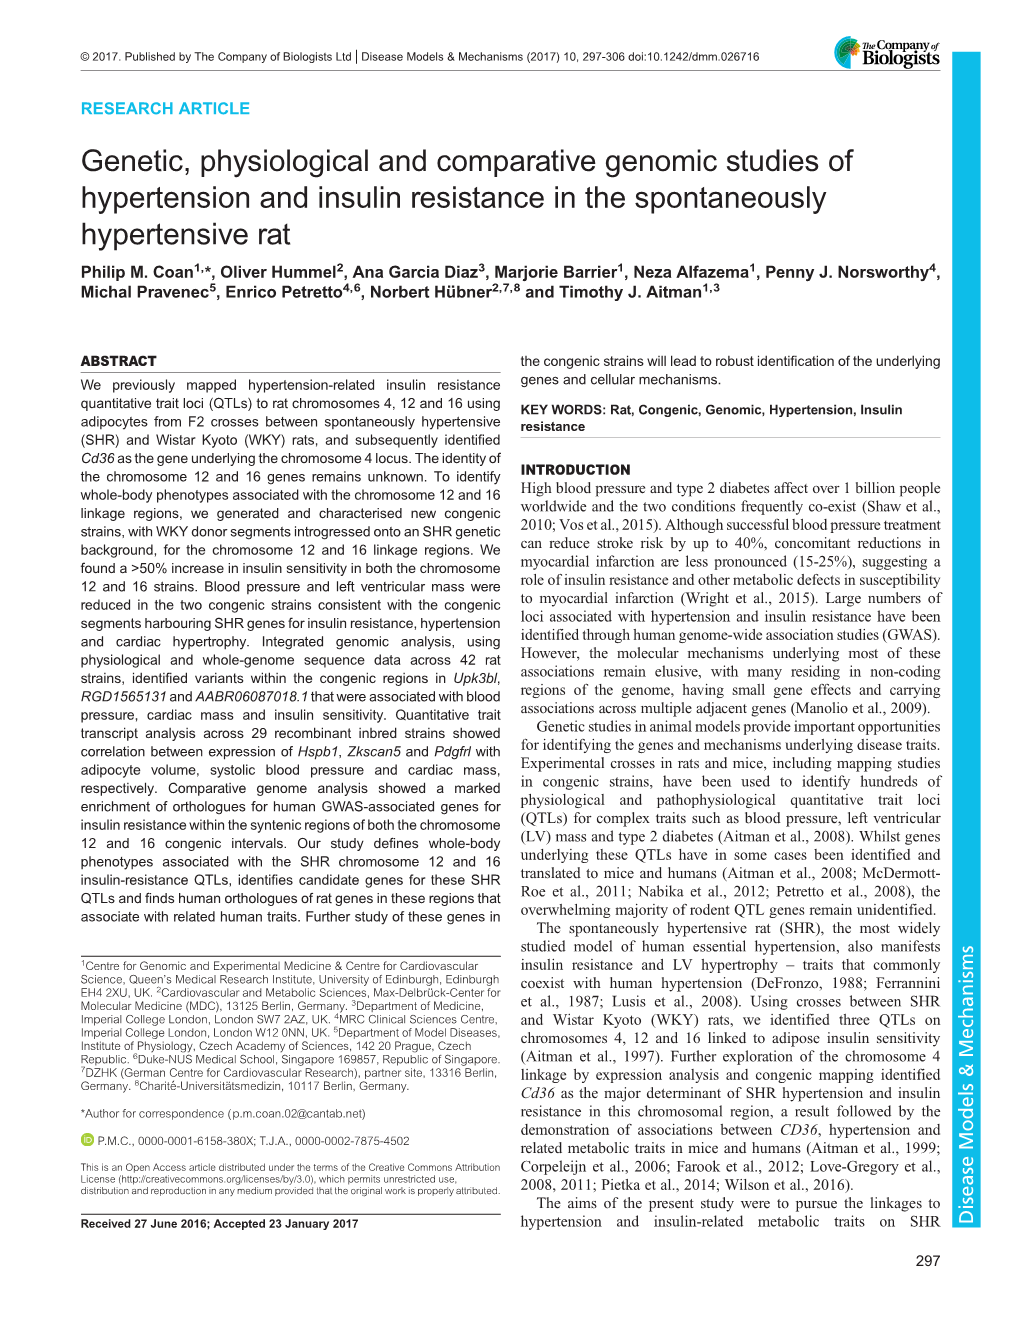 Genetic, Physiological and Comparative Genomic Studies of Hypertension and Insulin Resistance in the Spontaneously Hypertensive Rat Philip M